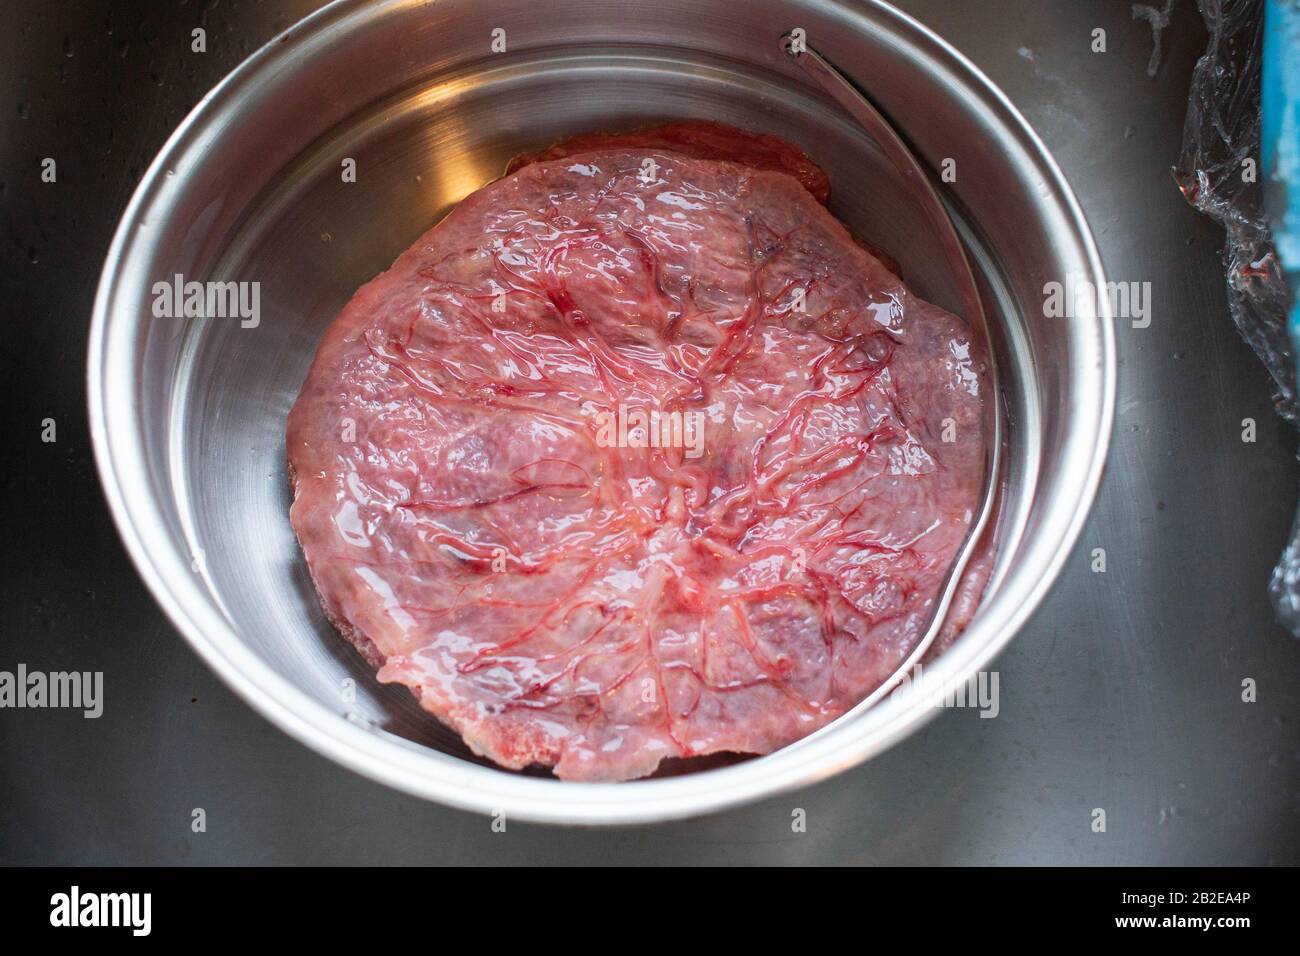 Clean placenta lying in stainless steel bowl in sink. Stock Photo